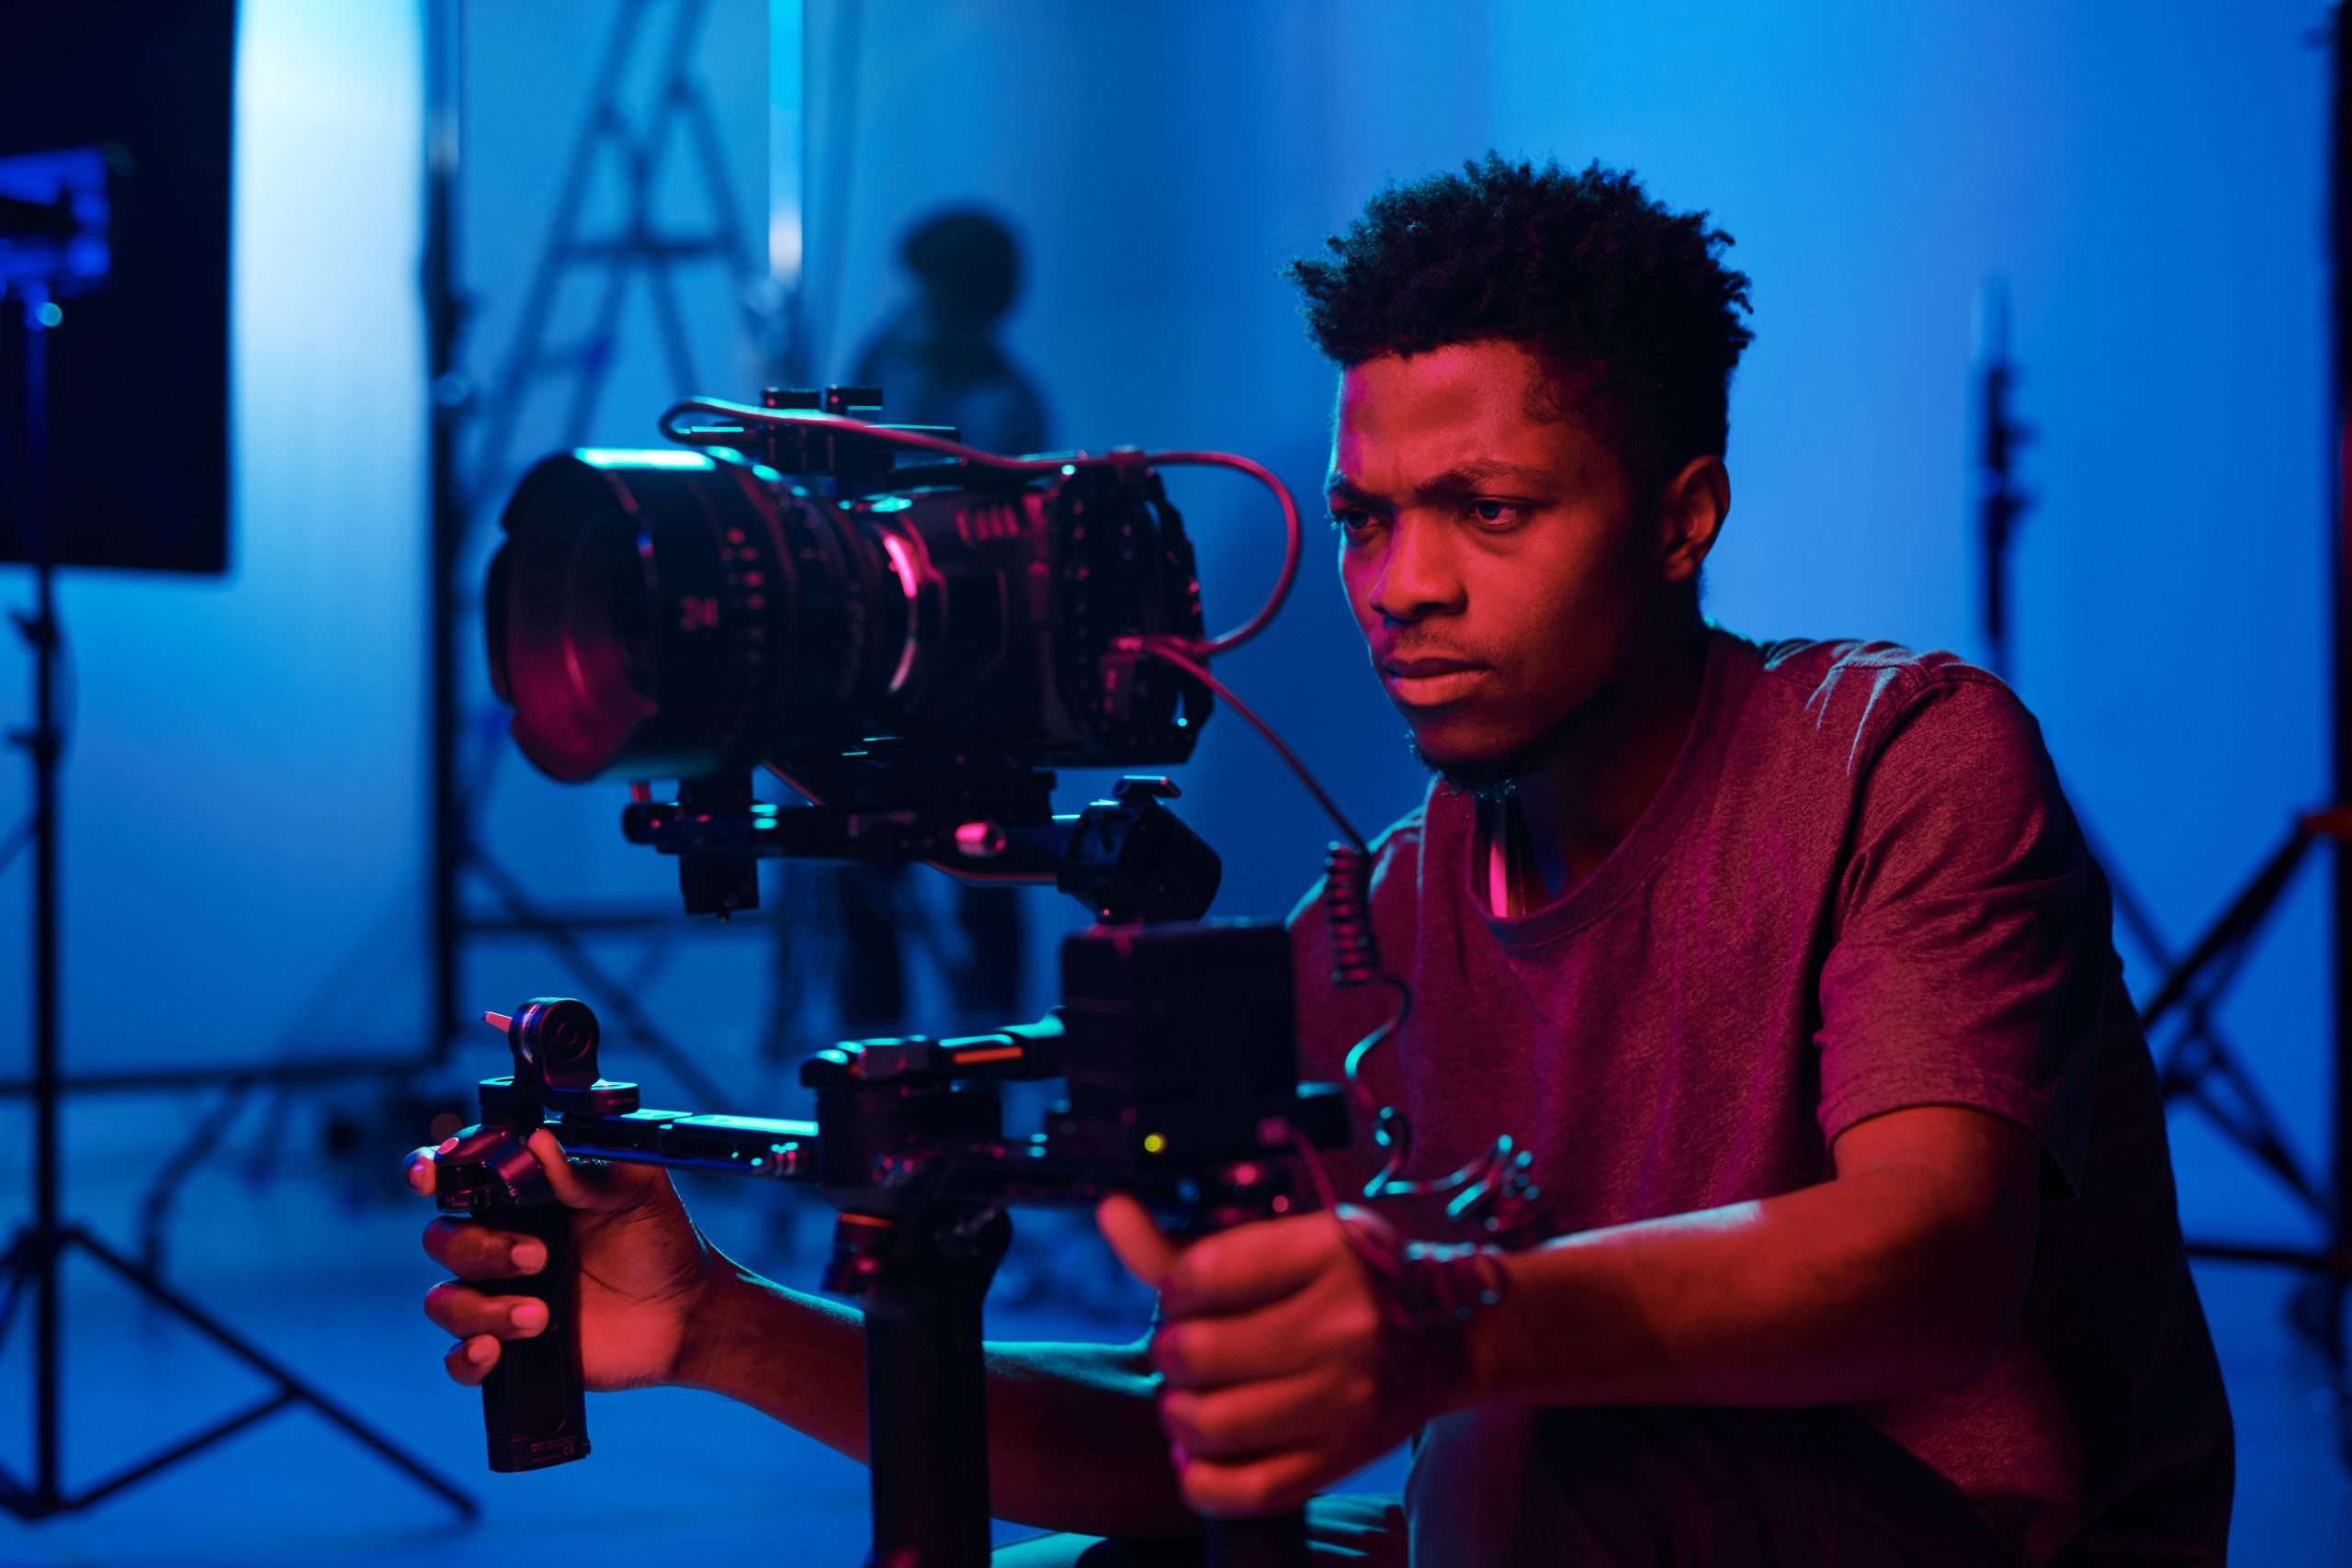 A young man holding a camera in a studio.